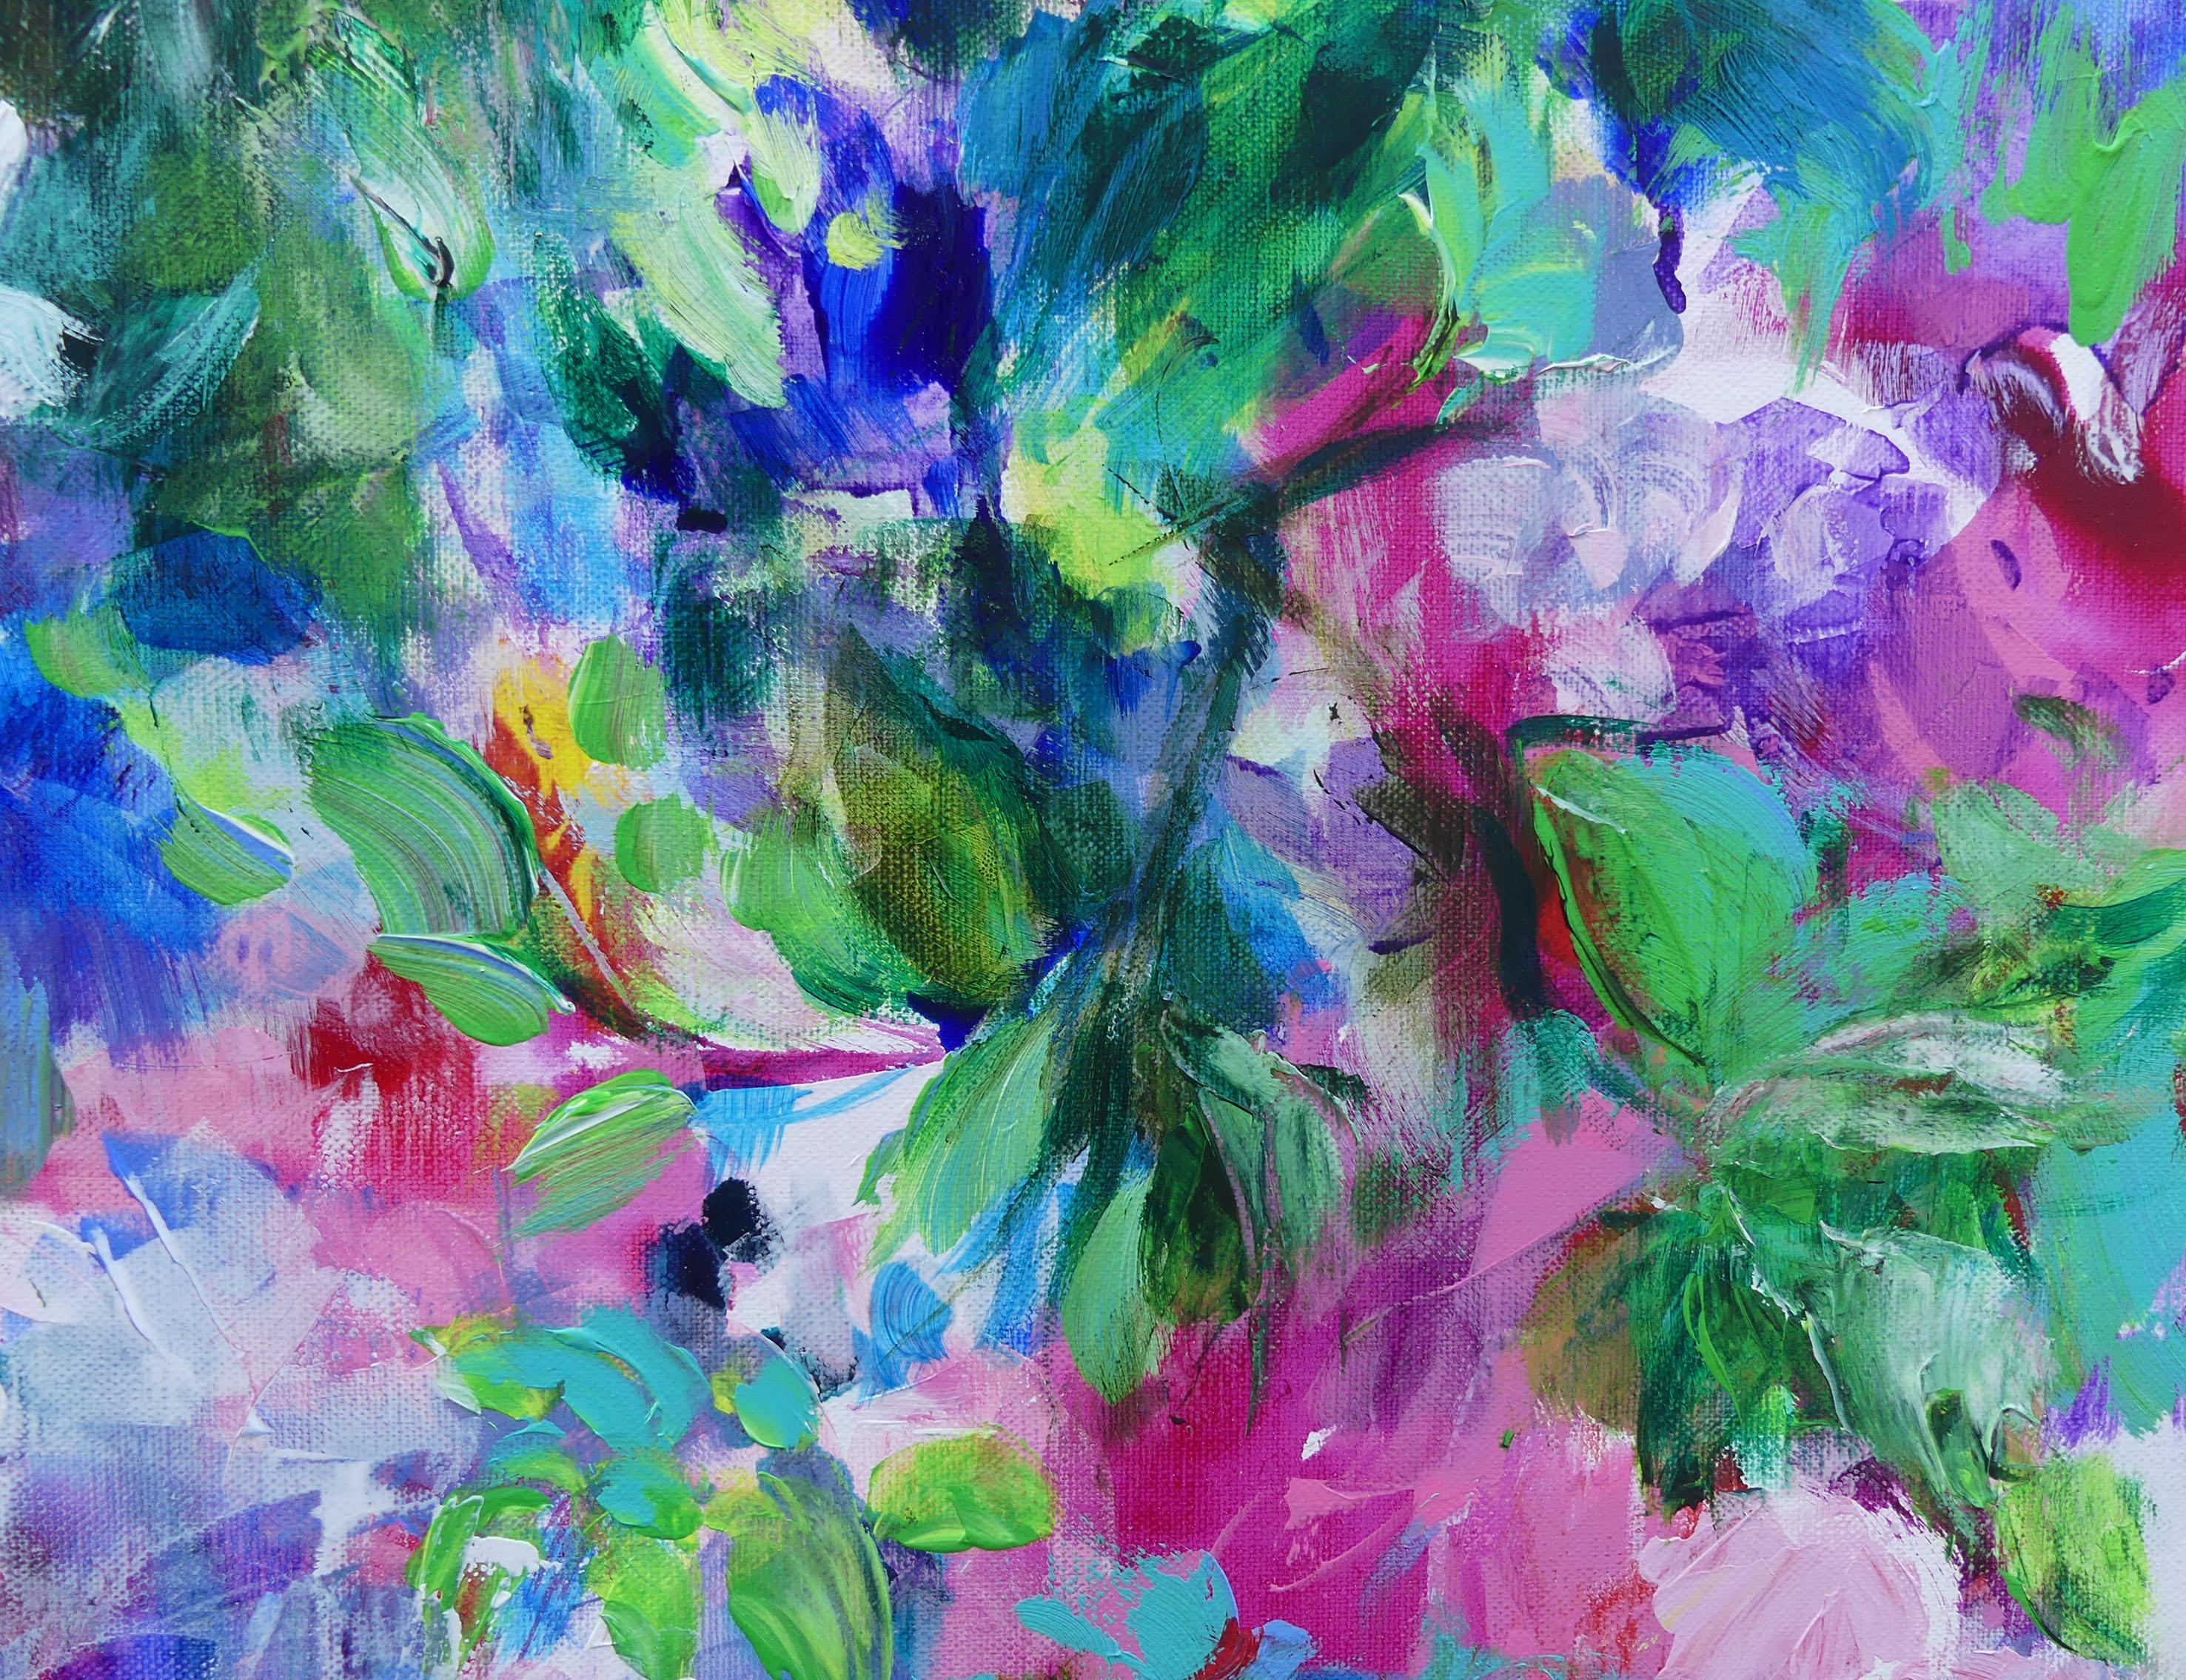 The season of happiness, Original art, Landscape, floral, Abstract, Nature  - Abstrait Painting par Mary Chaplin